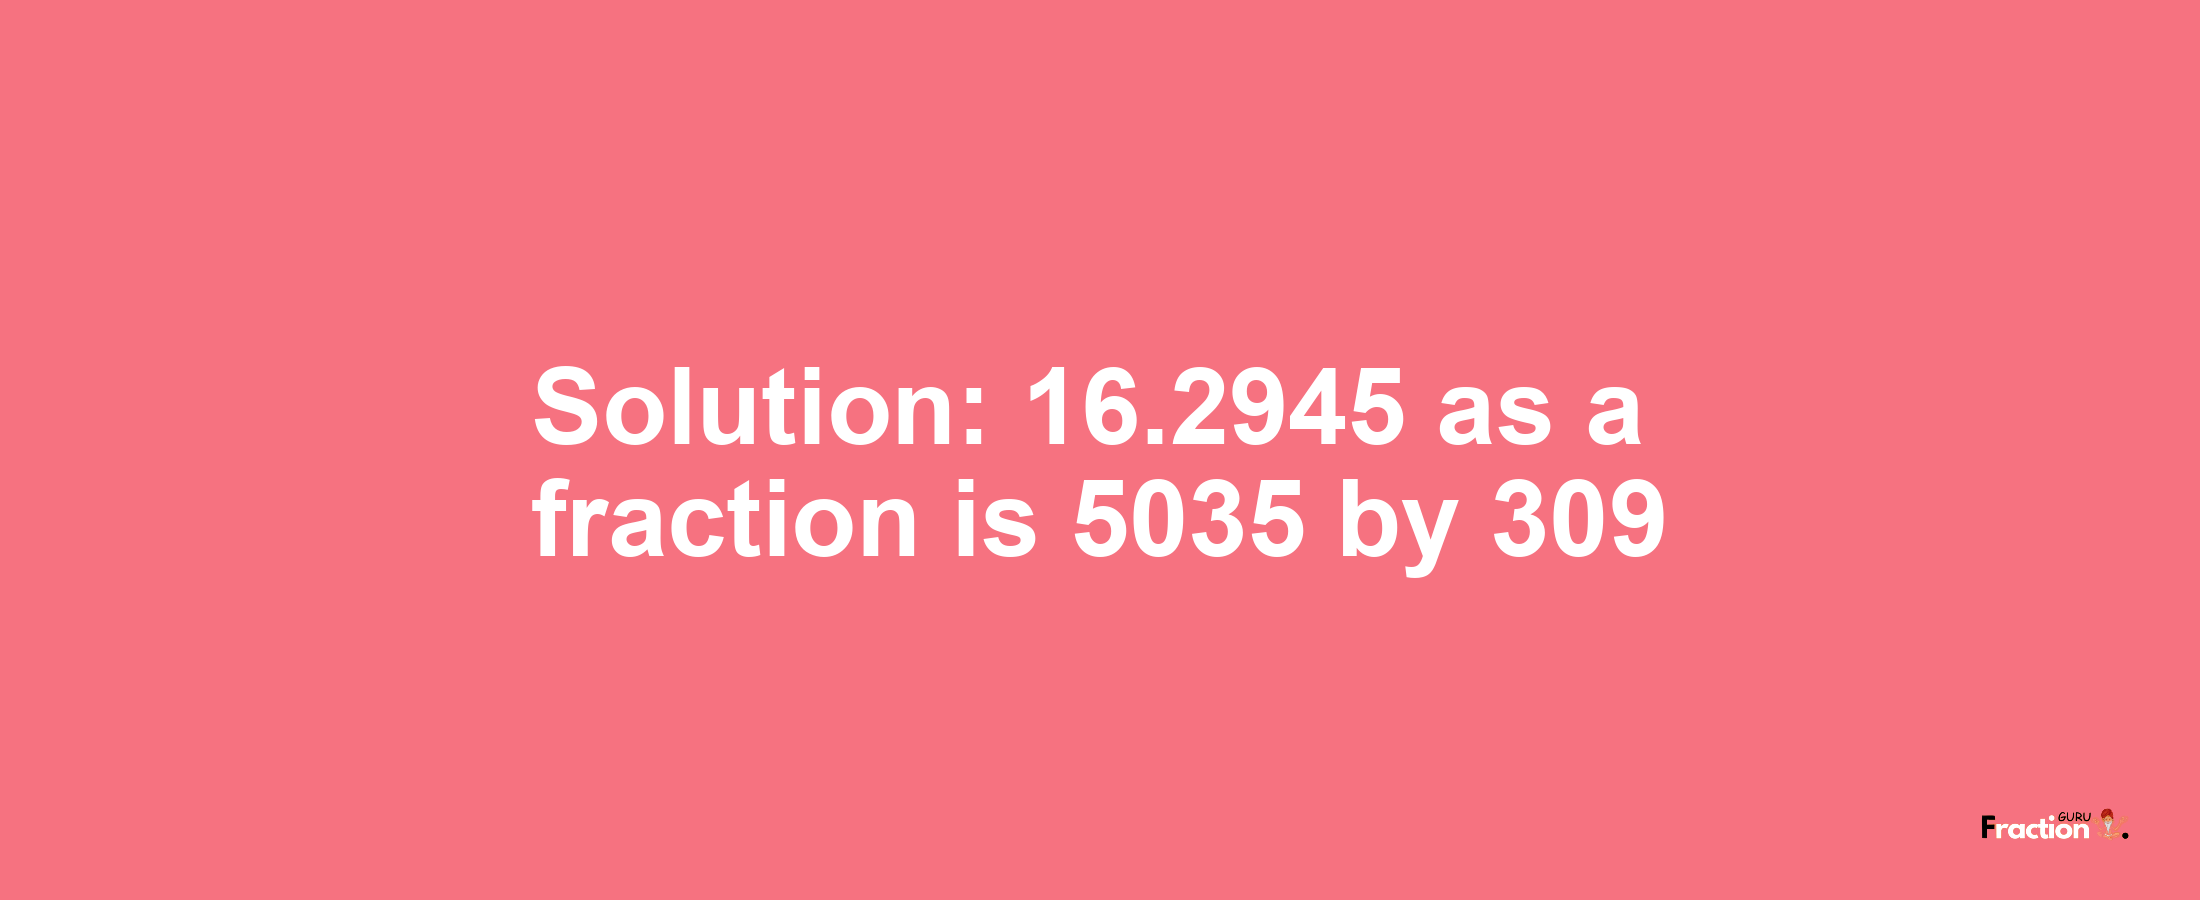 Solution:16.2945 as a fraction is 5035/309